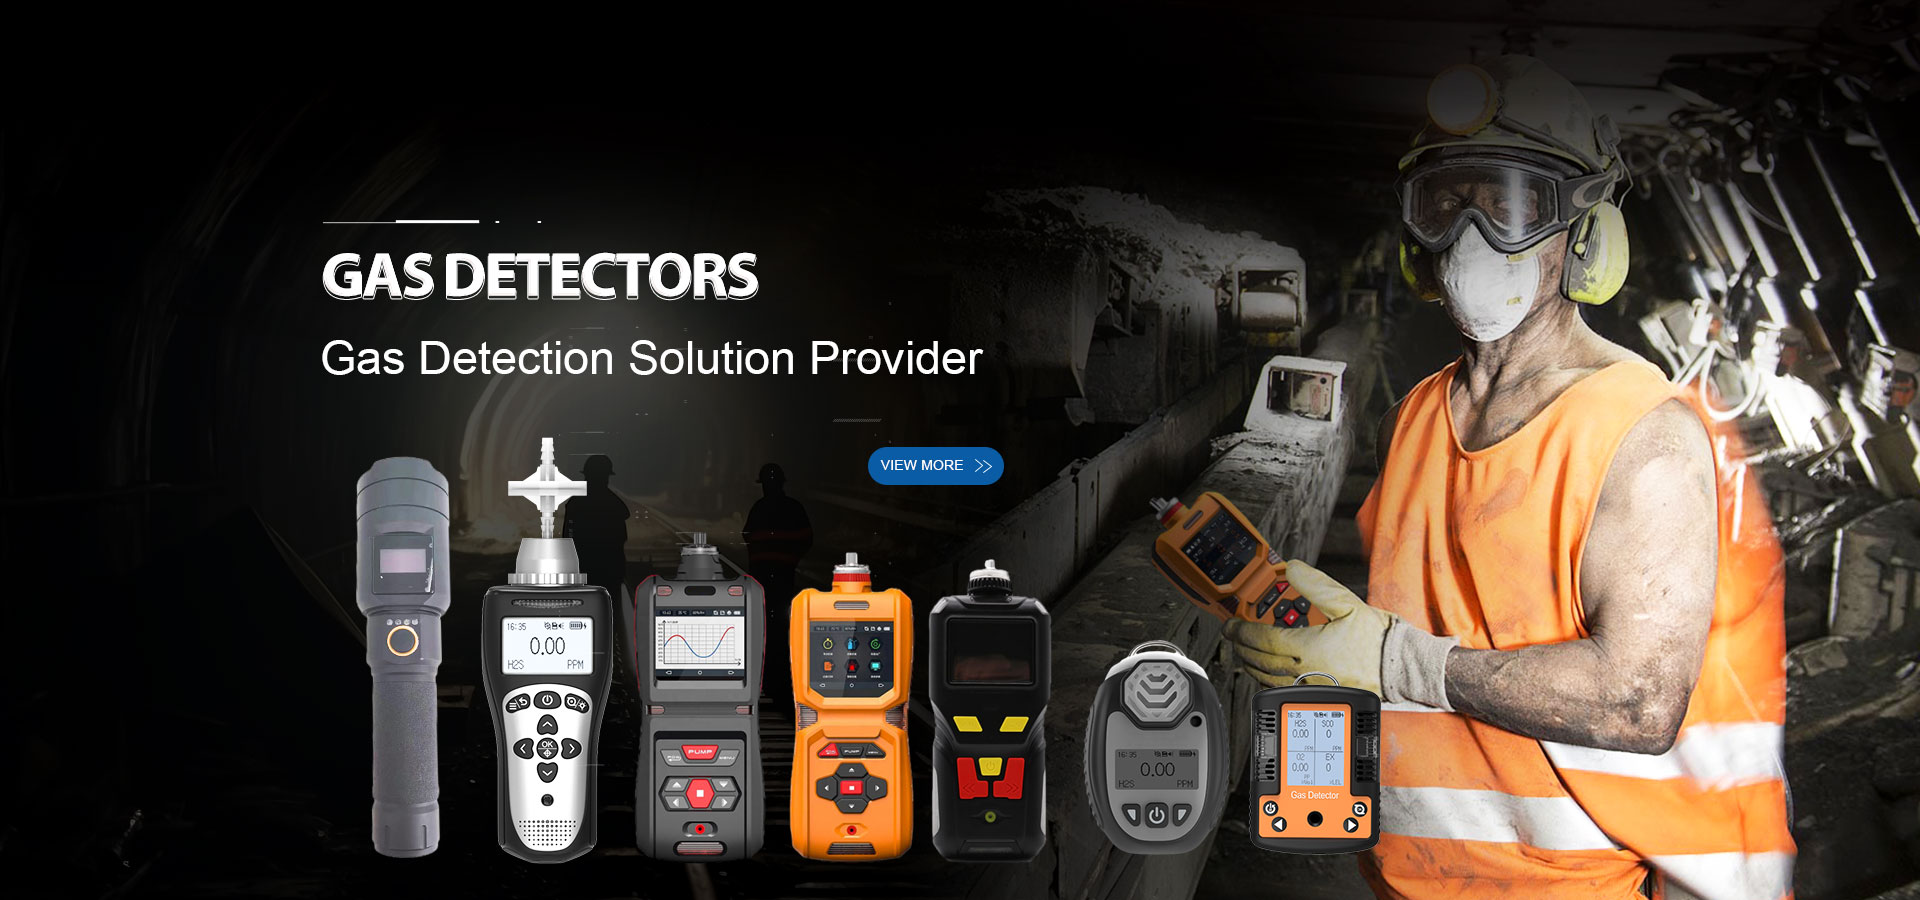 Fixed Gas Detectors Manufacturer and Supplier